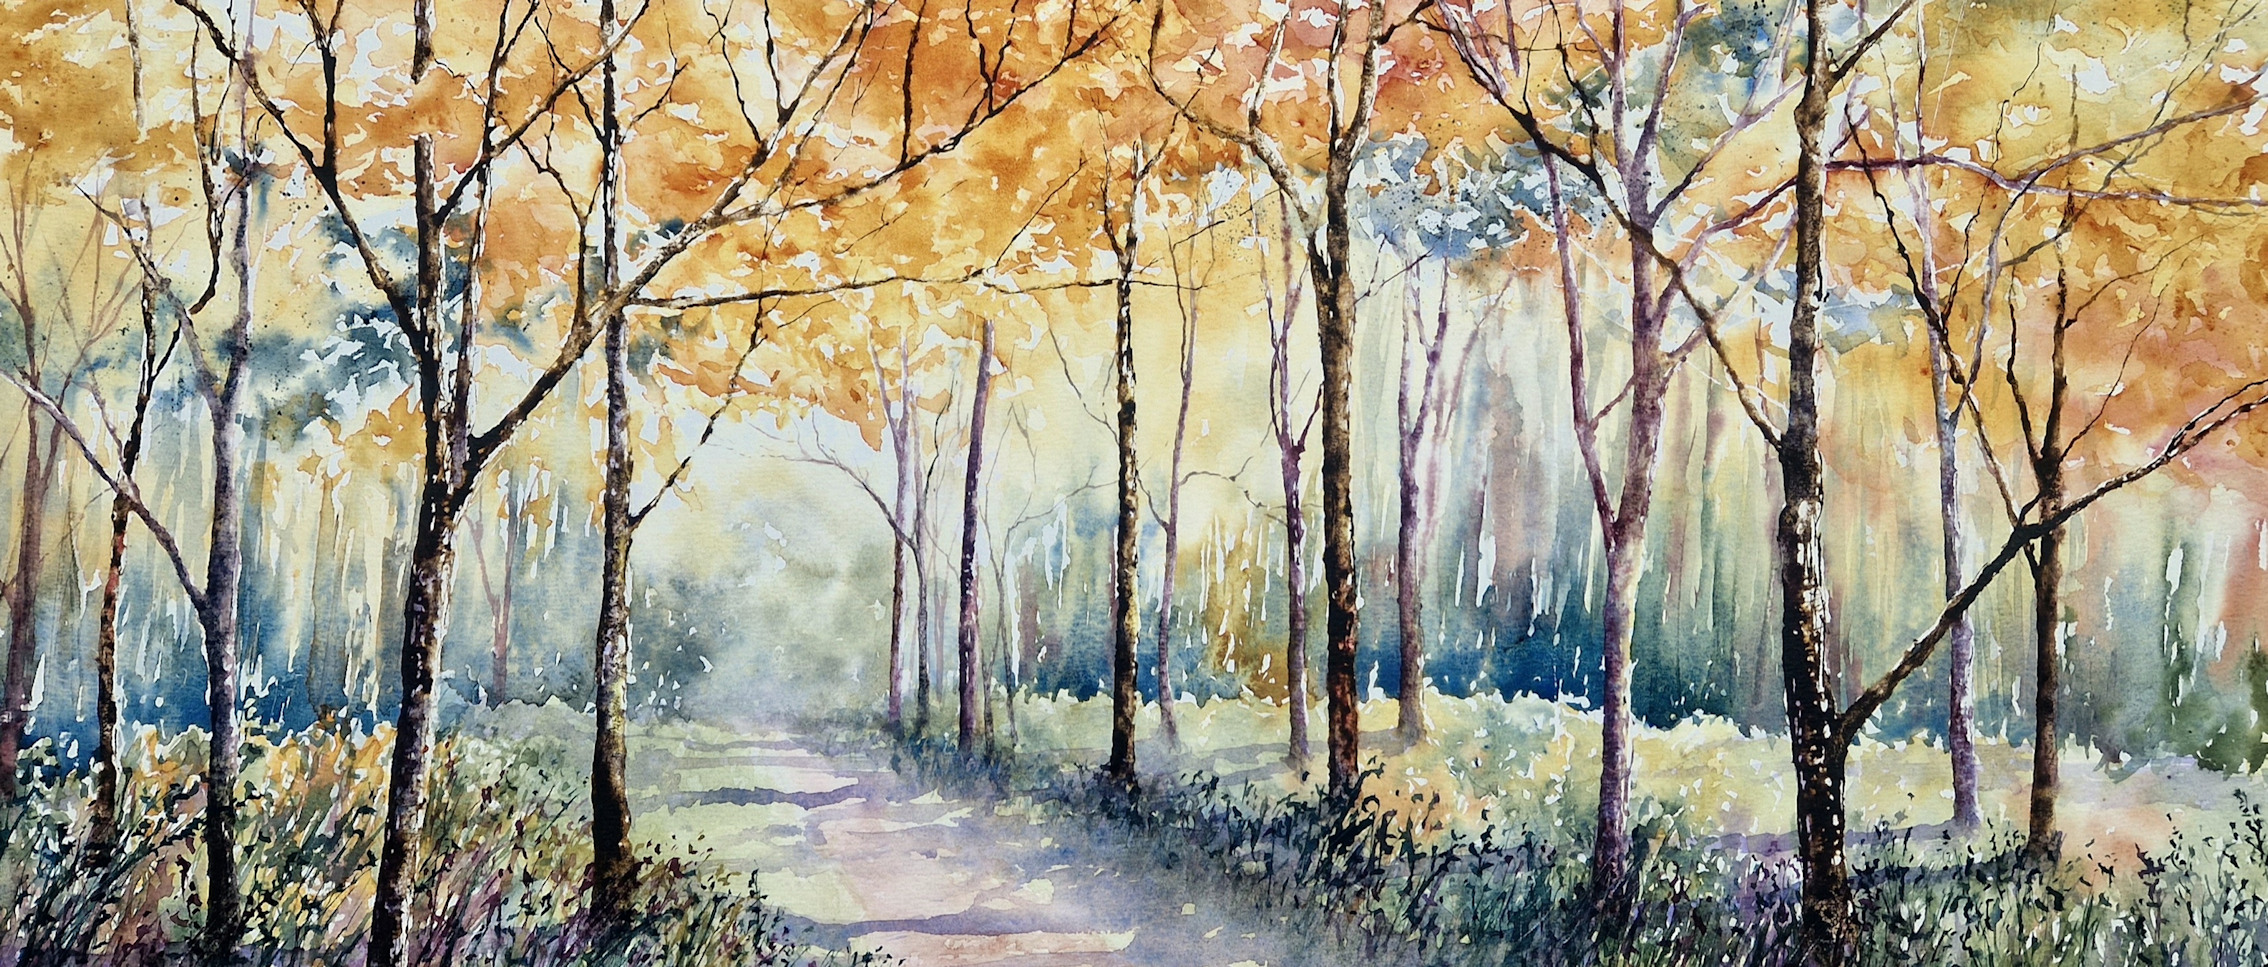 Painting of an autumn wood